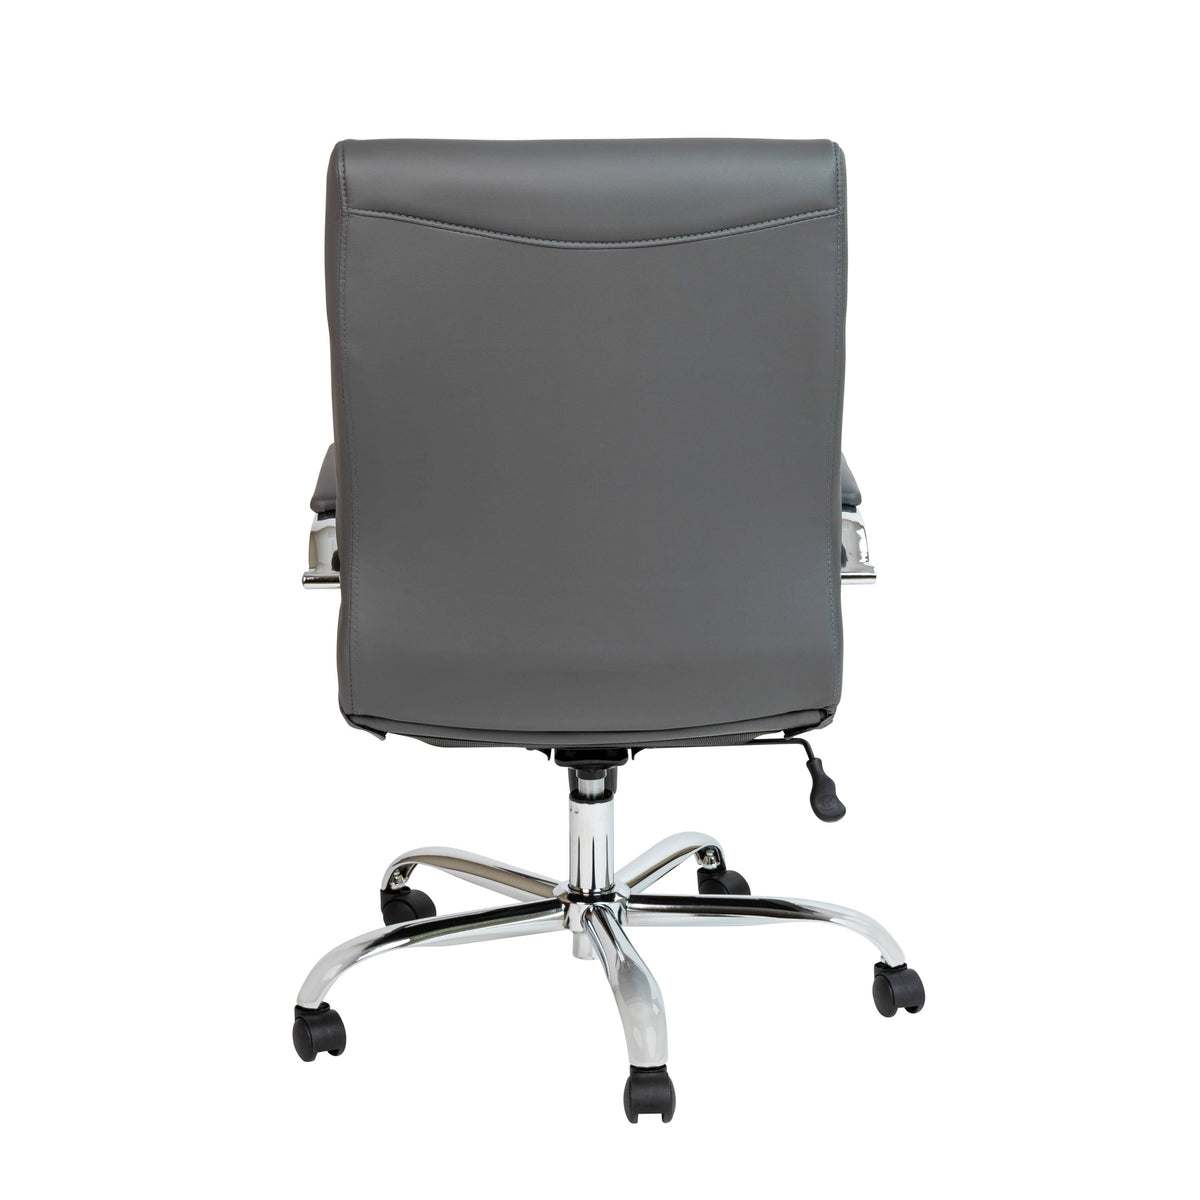 Gray LeatherSoft/Chrome Frame |#| Mid-Back Gray LeatherSoft Executive Swivel Office Chair with Chrome Frame/Arms